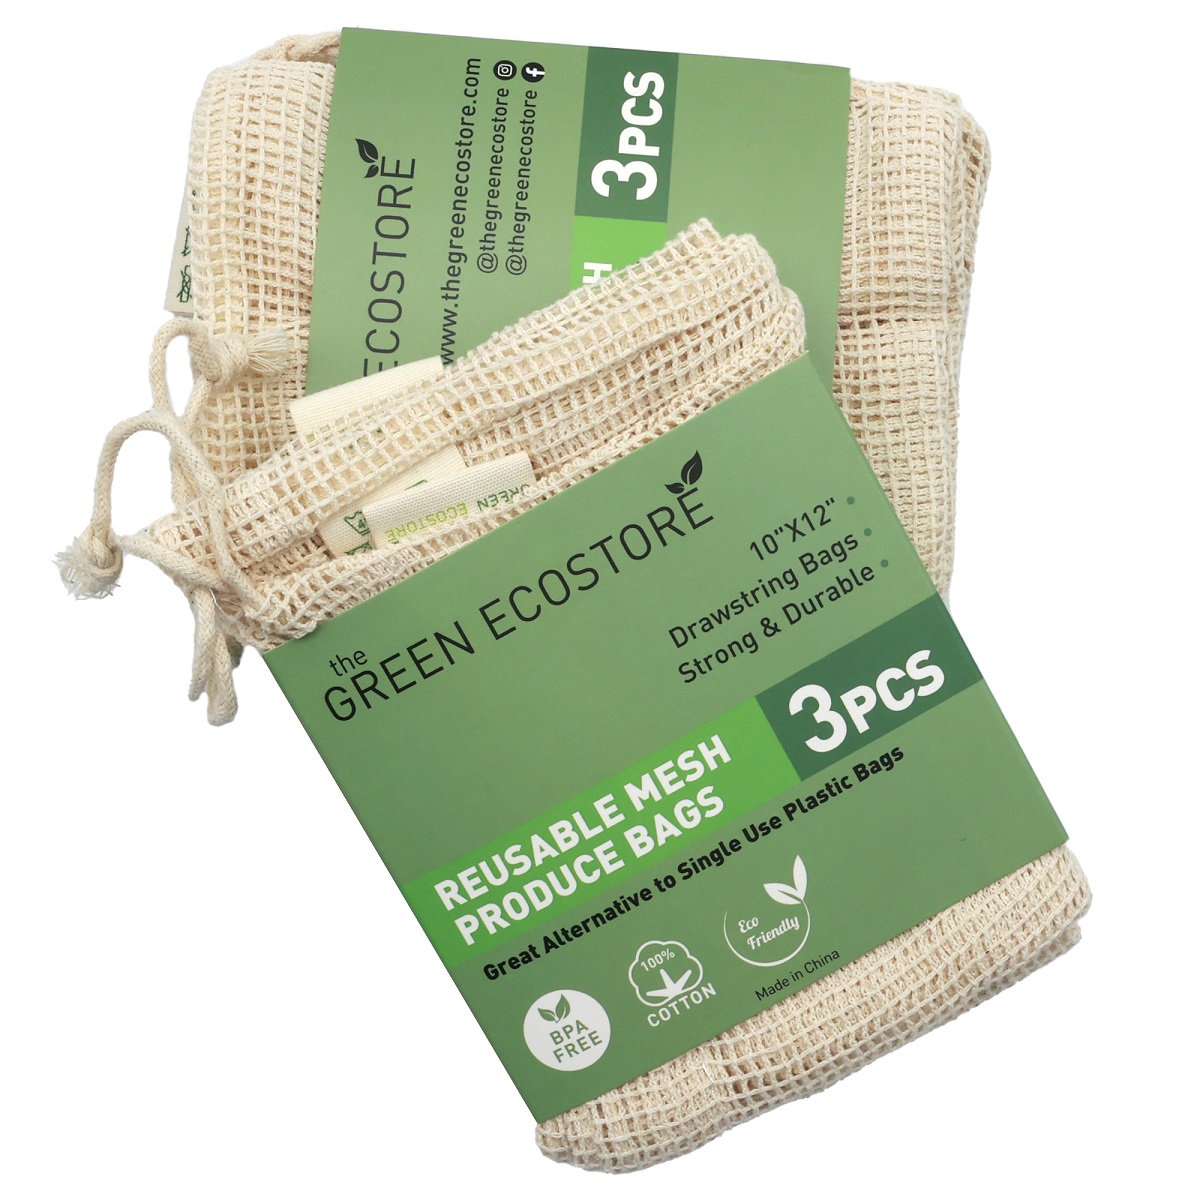 Image for The Green Ecostore Announces The Launch Of Reusable Produce Bags And Totes